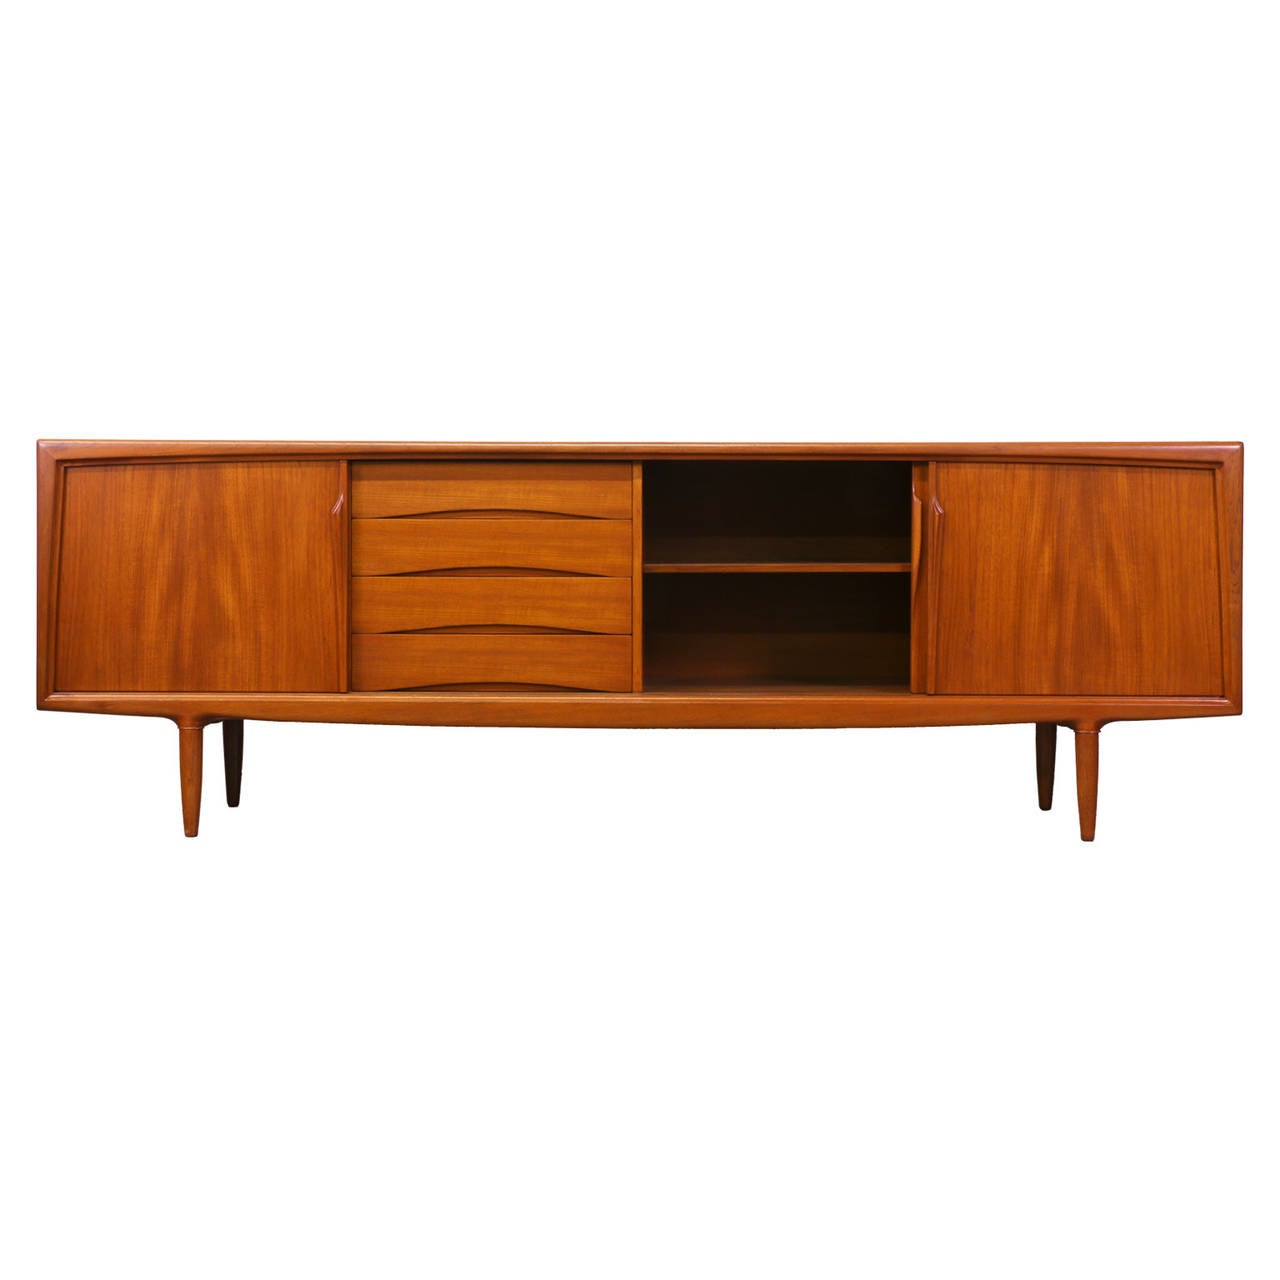 Designer: Gunni Omann.
Manufacturer: Axel Christiansen.
Period/Style: Danish Modern.
Country: Denmark.
Date: 1960s.

Dimensions: 31.5″ H x 94.5″ L x 17.5″ W.
Materials: Teak.
Condition: Excellent, newly refinished.
Number of items: One.
ID